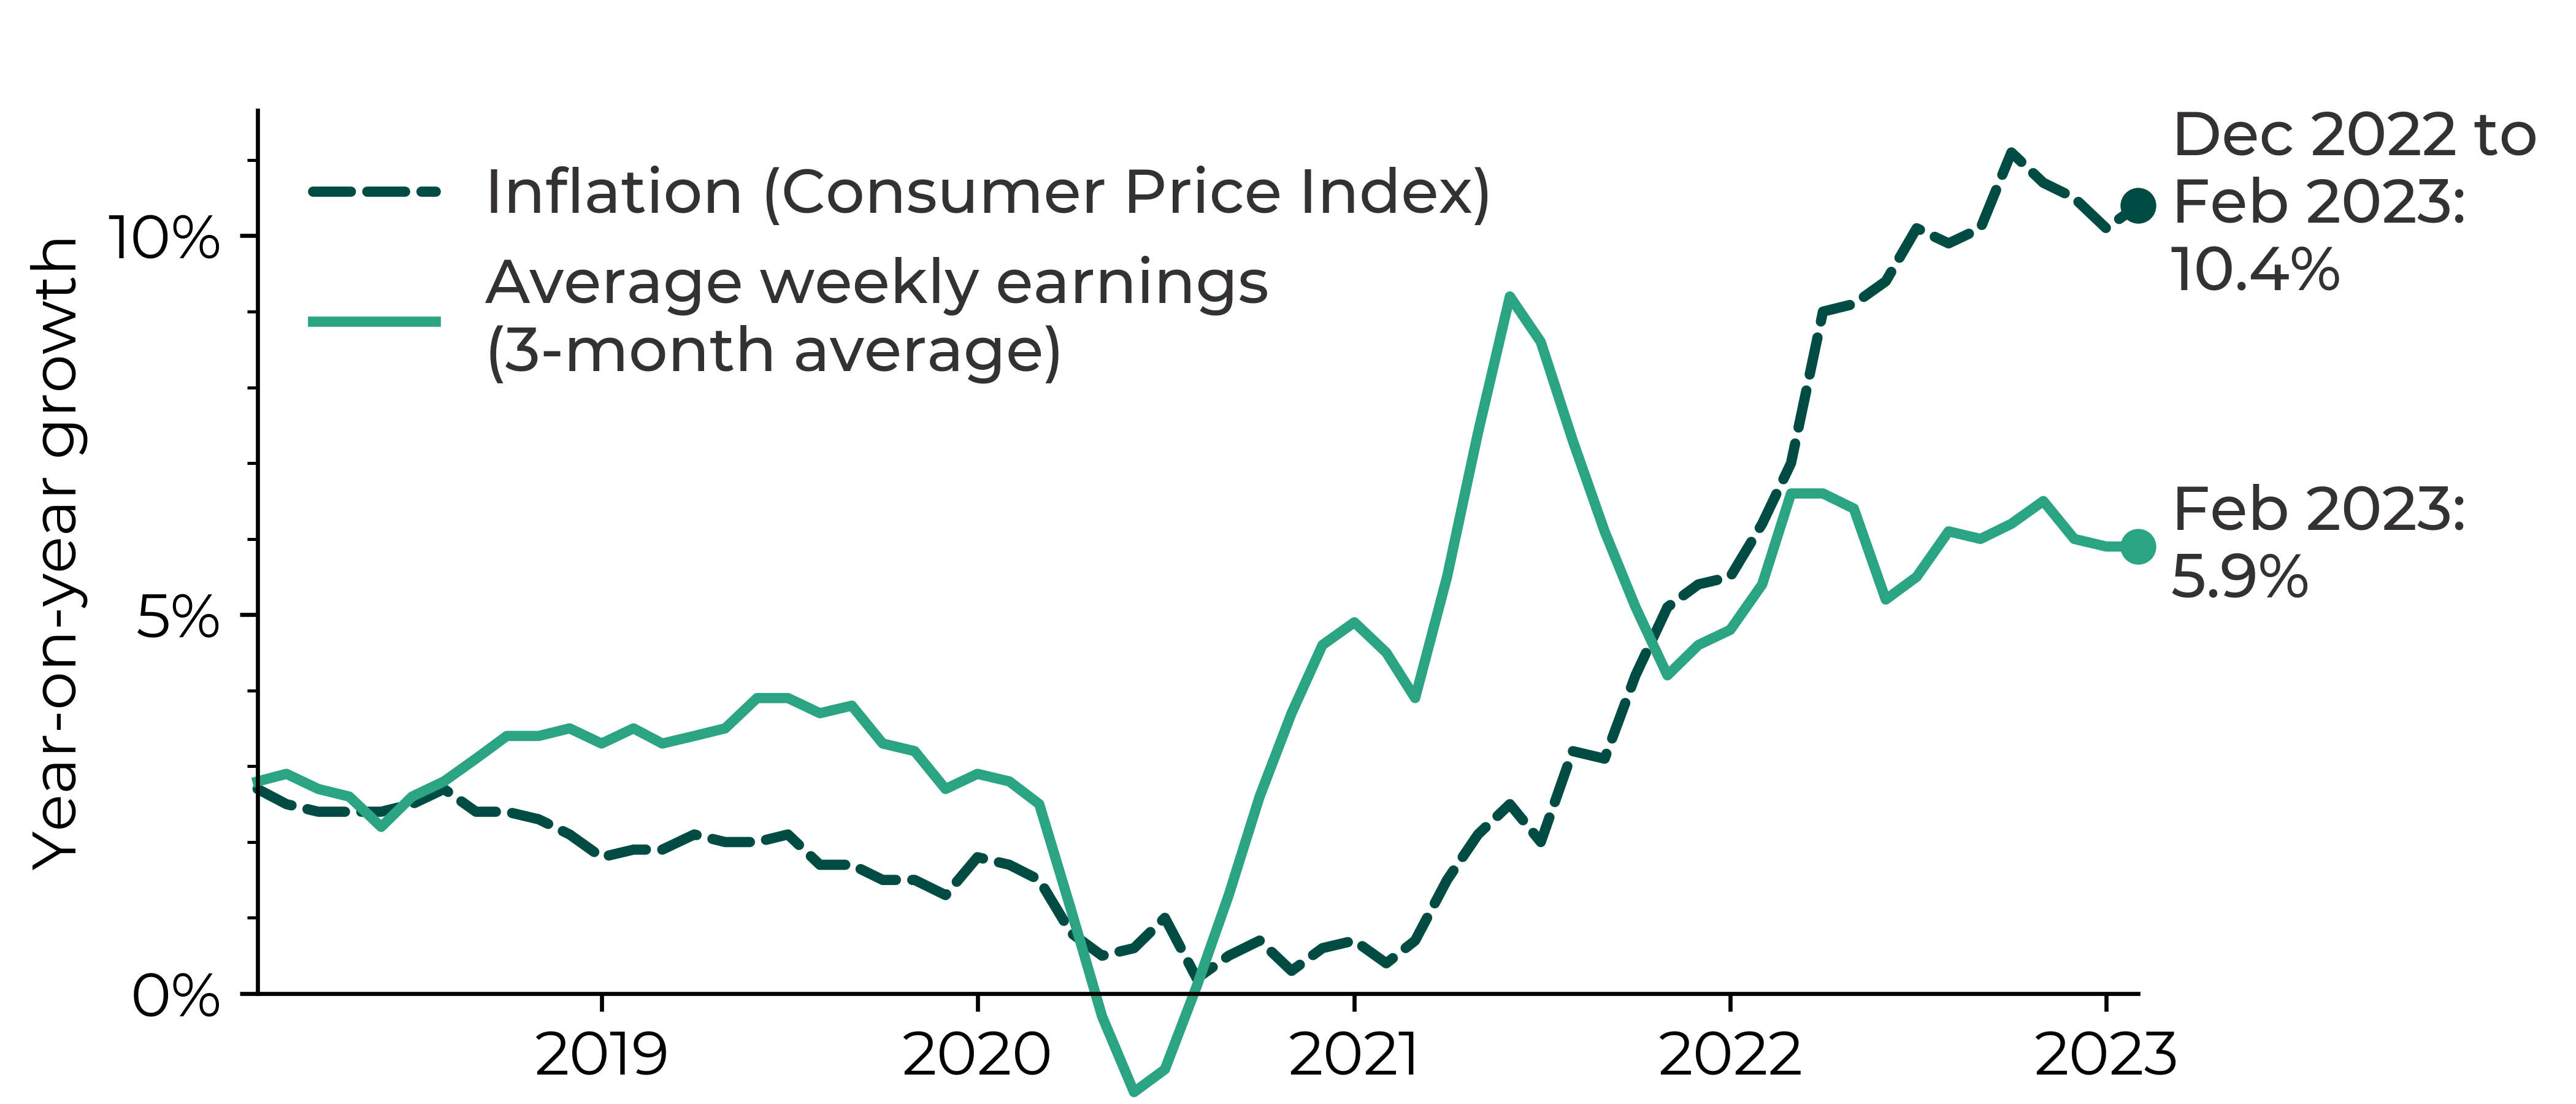 Graph showing UK inflation exceeding average weekly earnings (3-month average) in 2022-23. In February 2023, the average weekly earnings were 5.9% higher than for February 2022 whereas the Consumer Price Index inflation was at 10.4%.